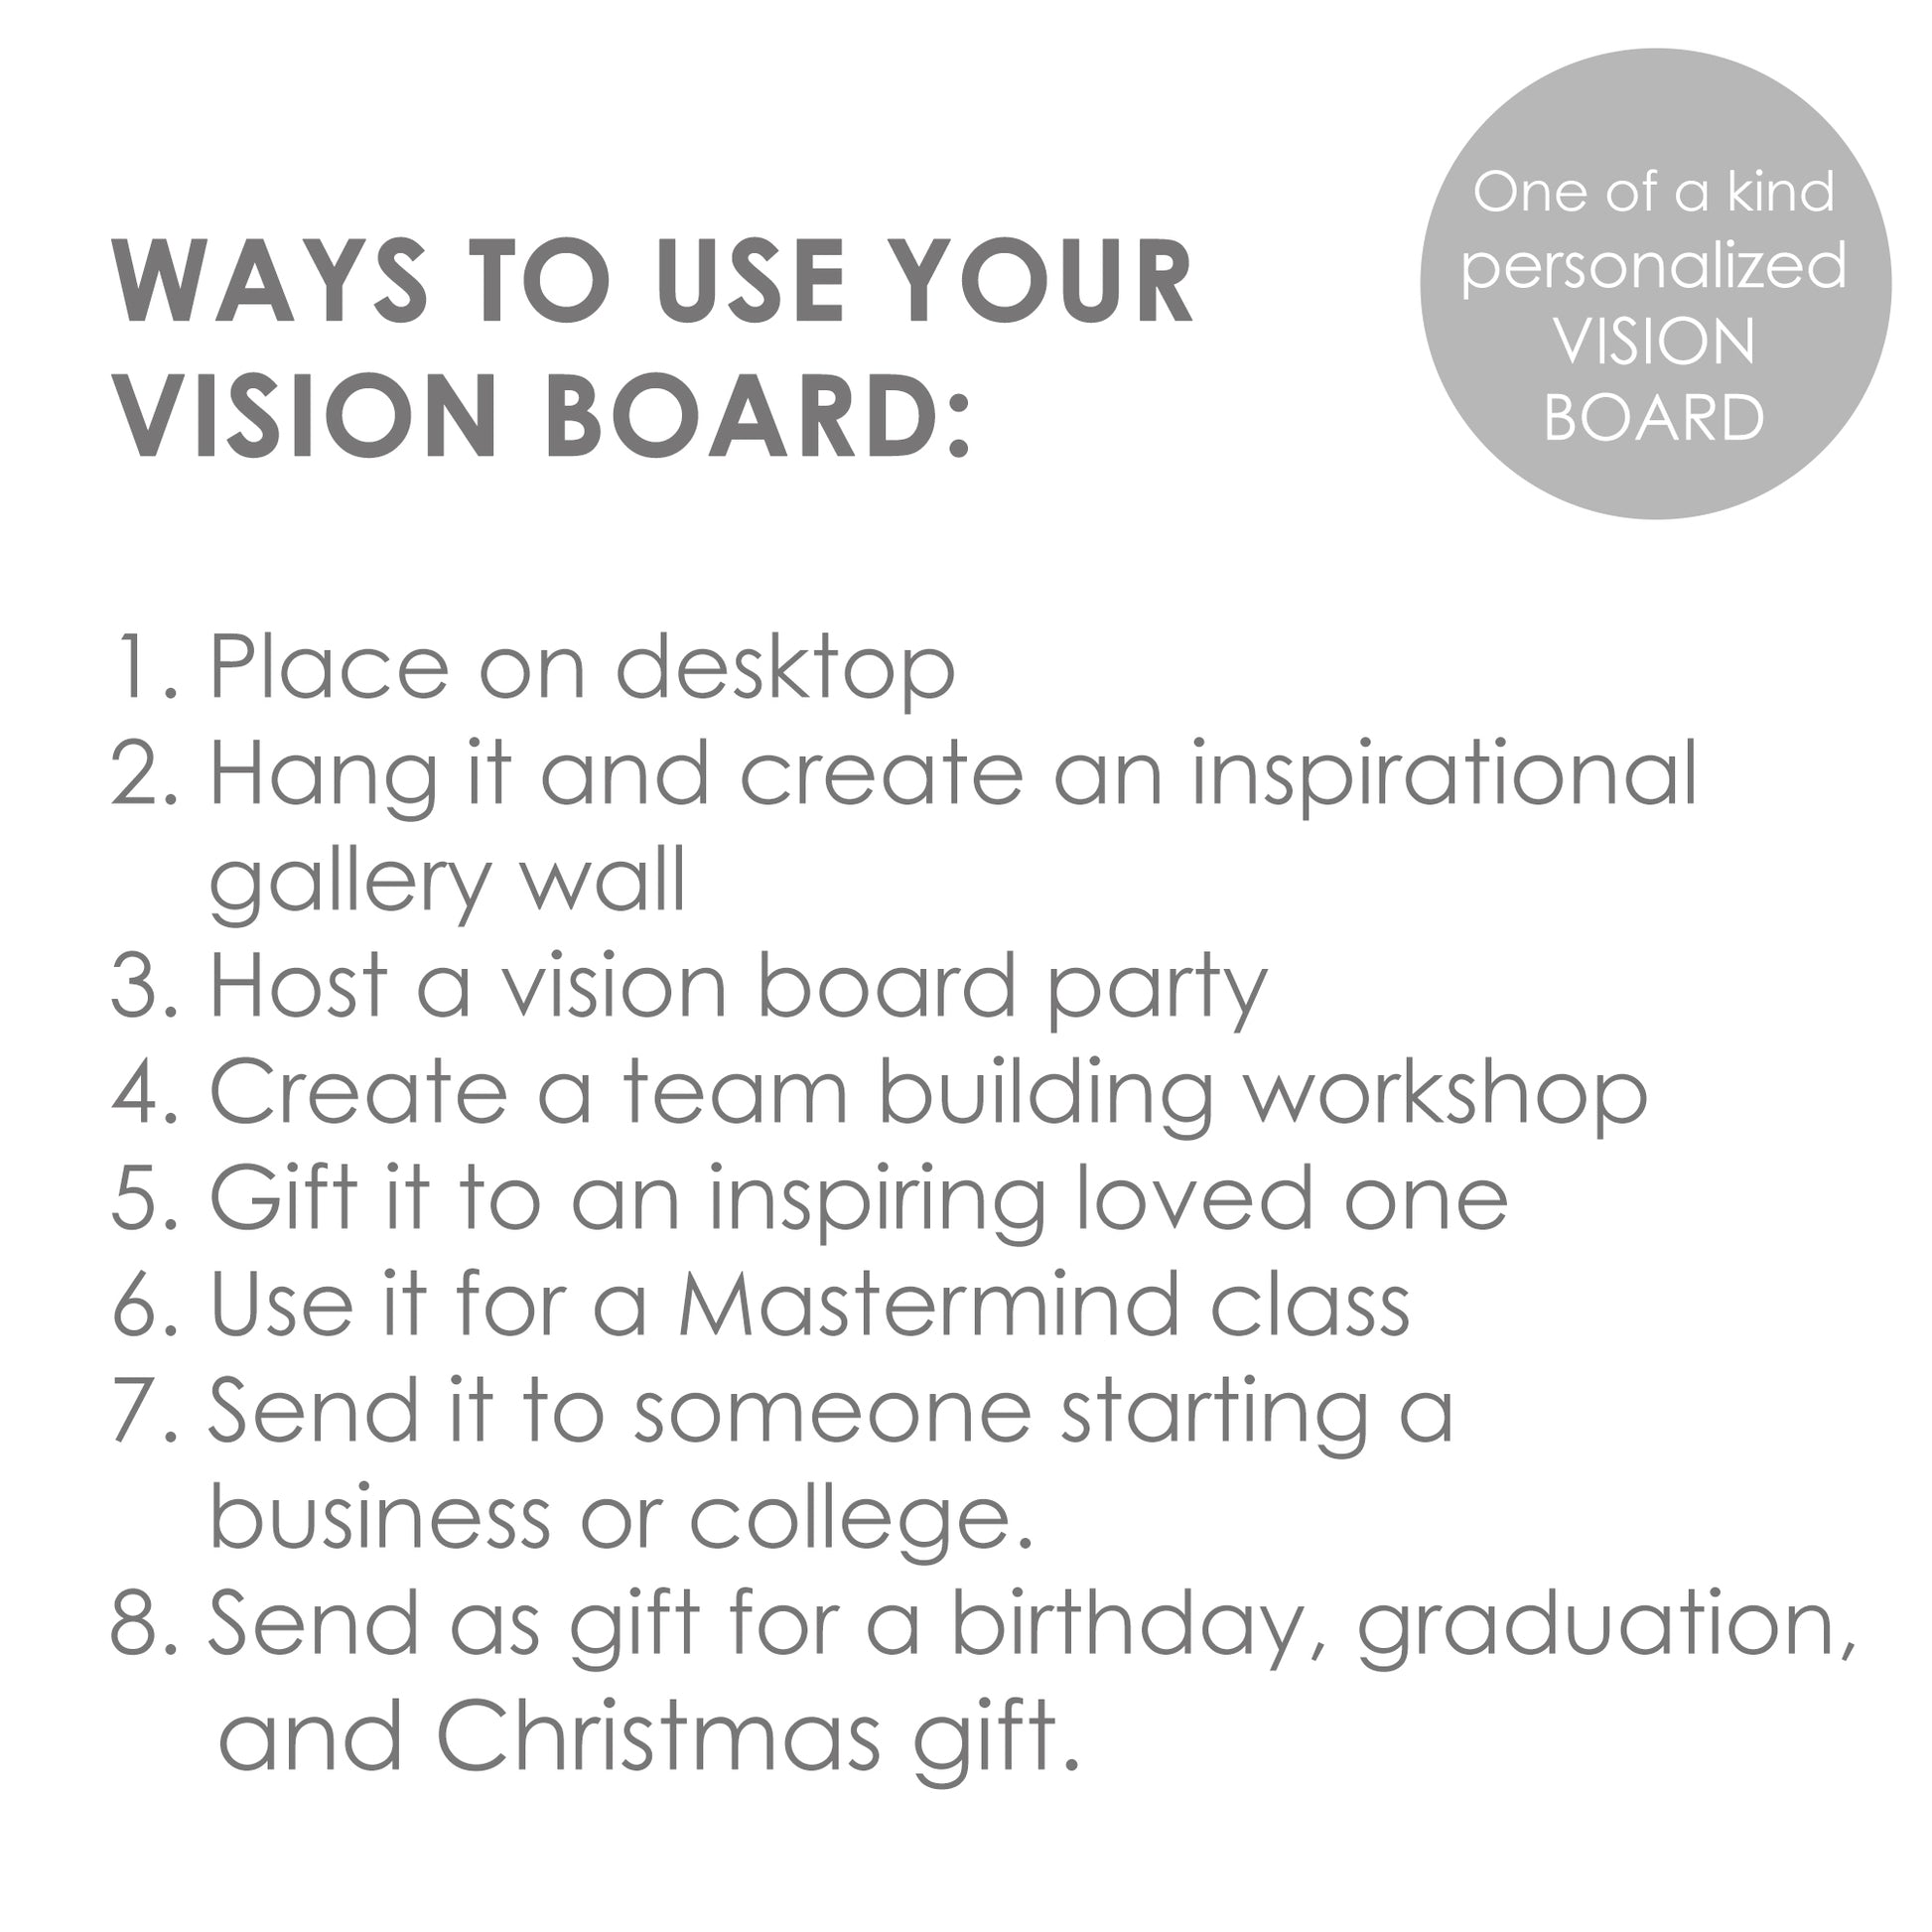 Jumpstart 2021 with A Vision Board